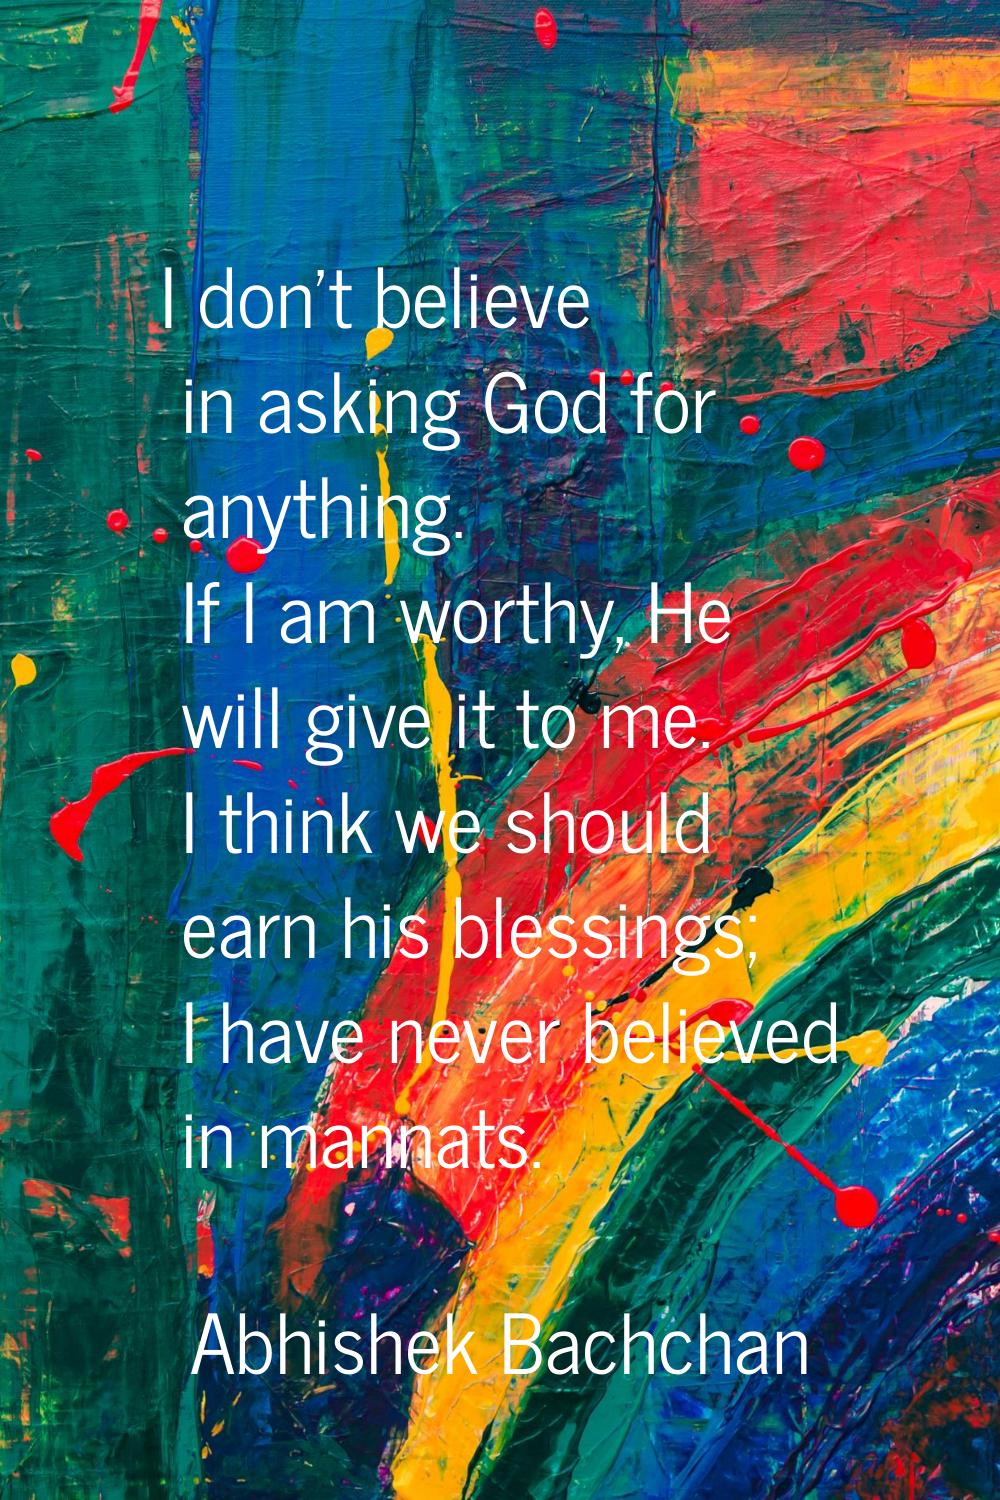 I don't believe in asking God for anything. If I am worthy, He will give it to me. I think we shoul